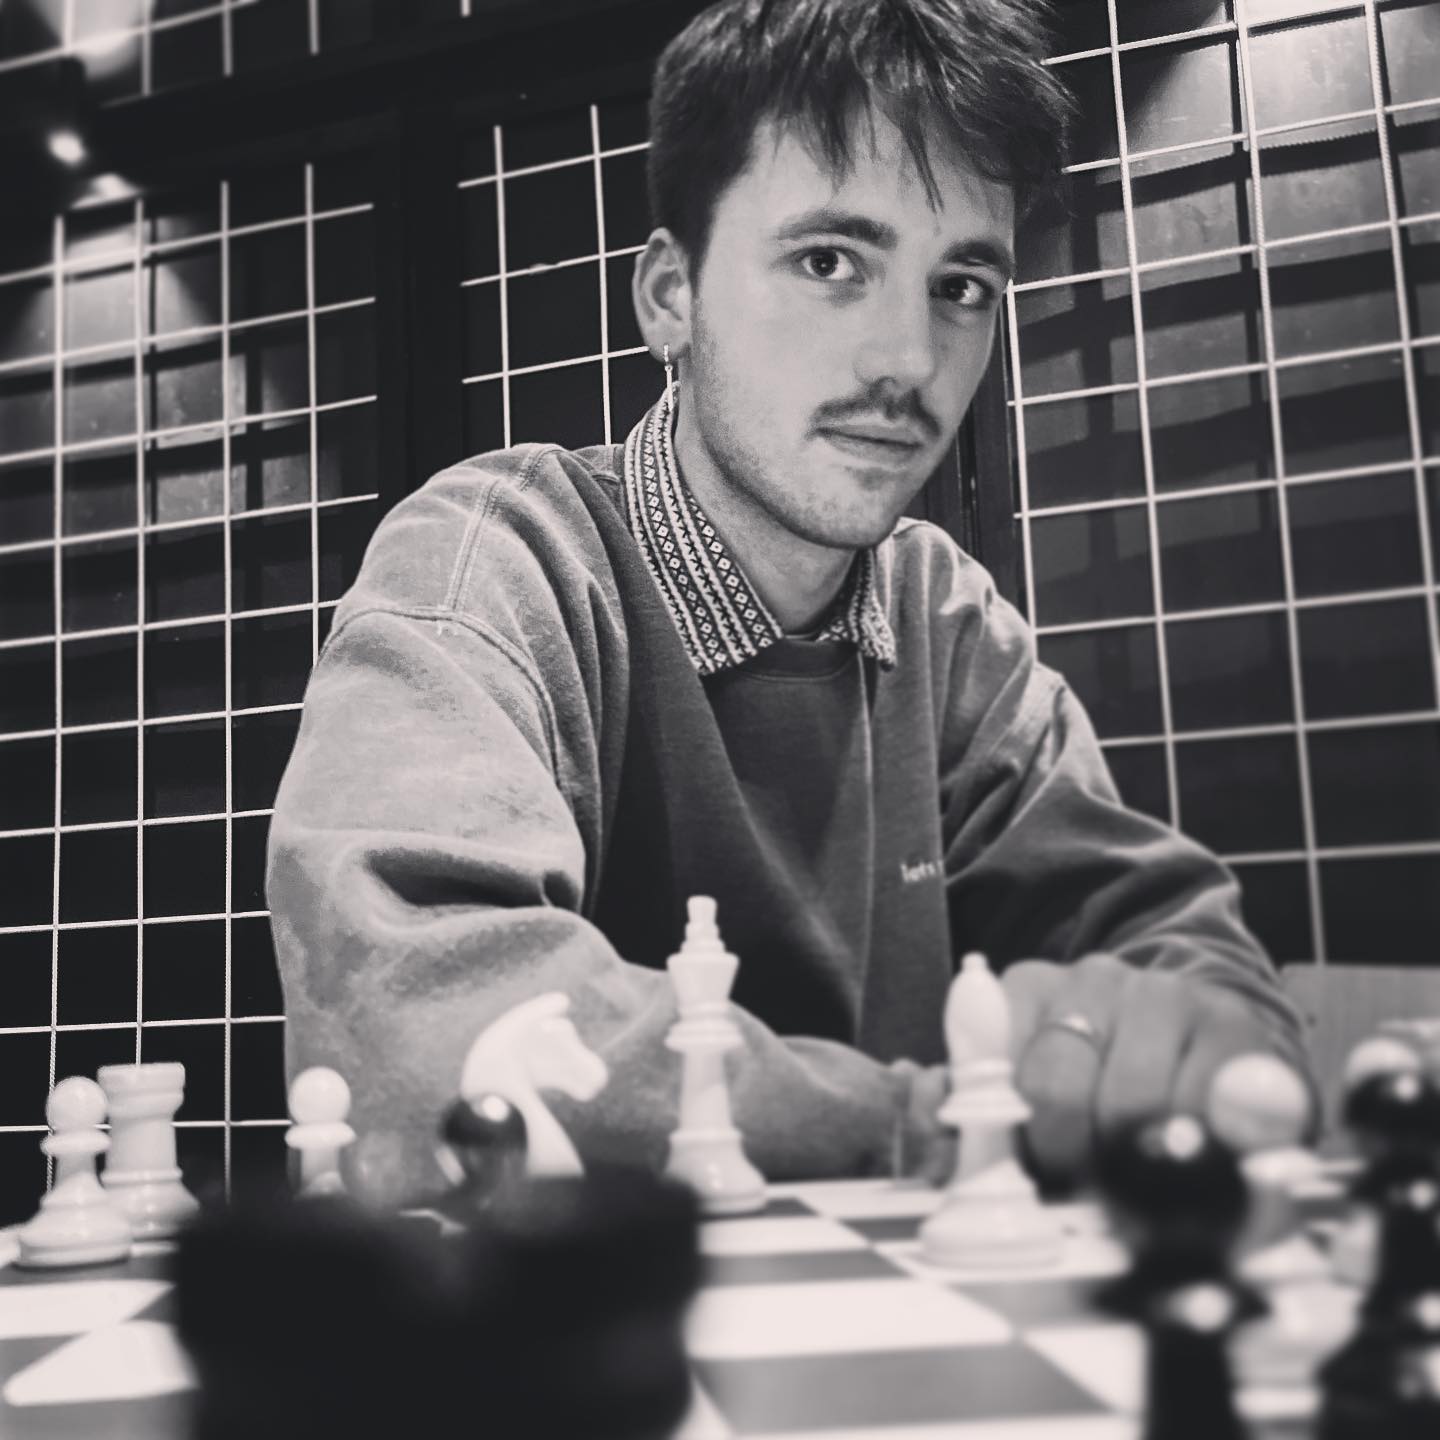 A young man infront of a chessboard looking at the camera